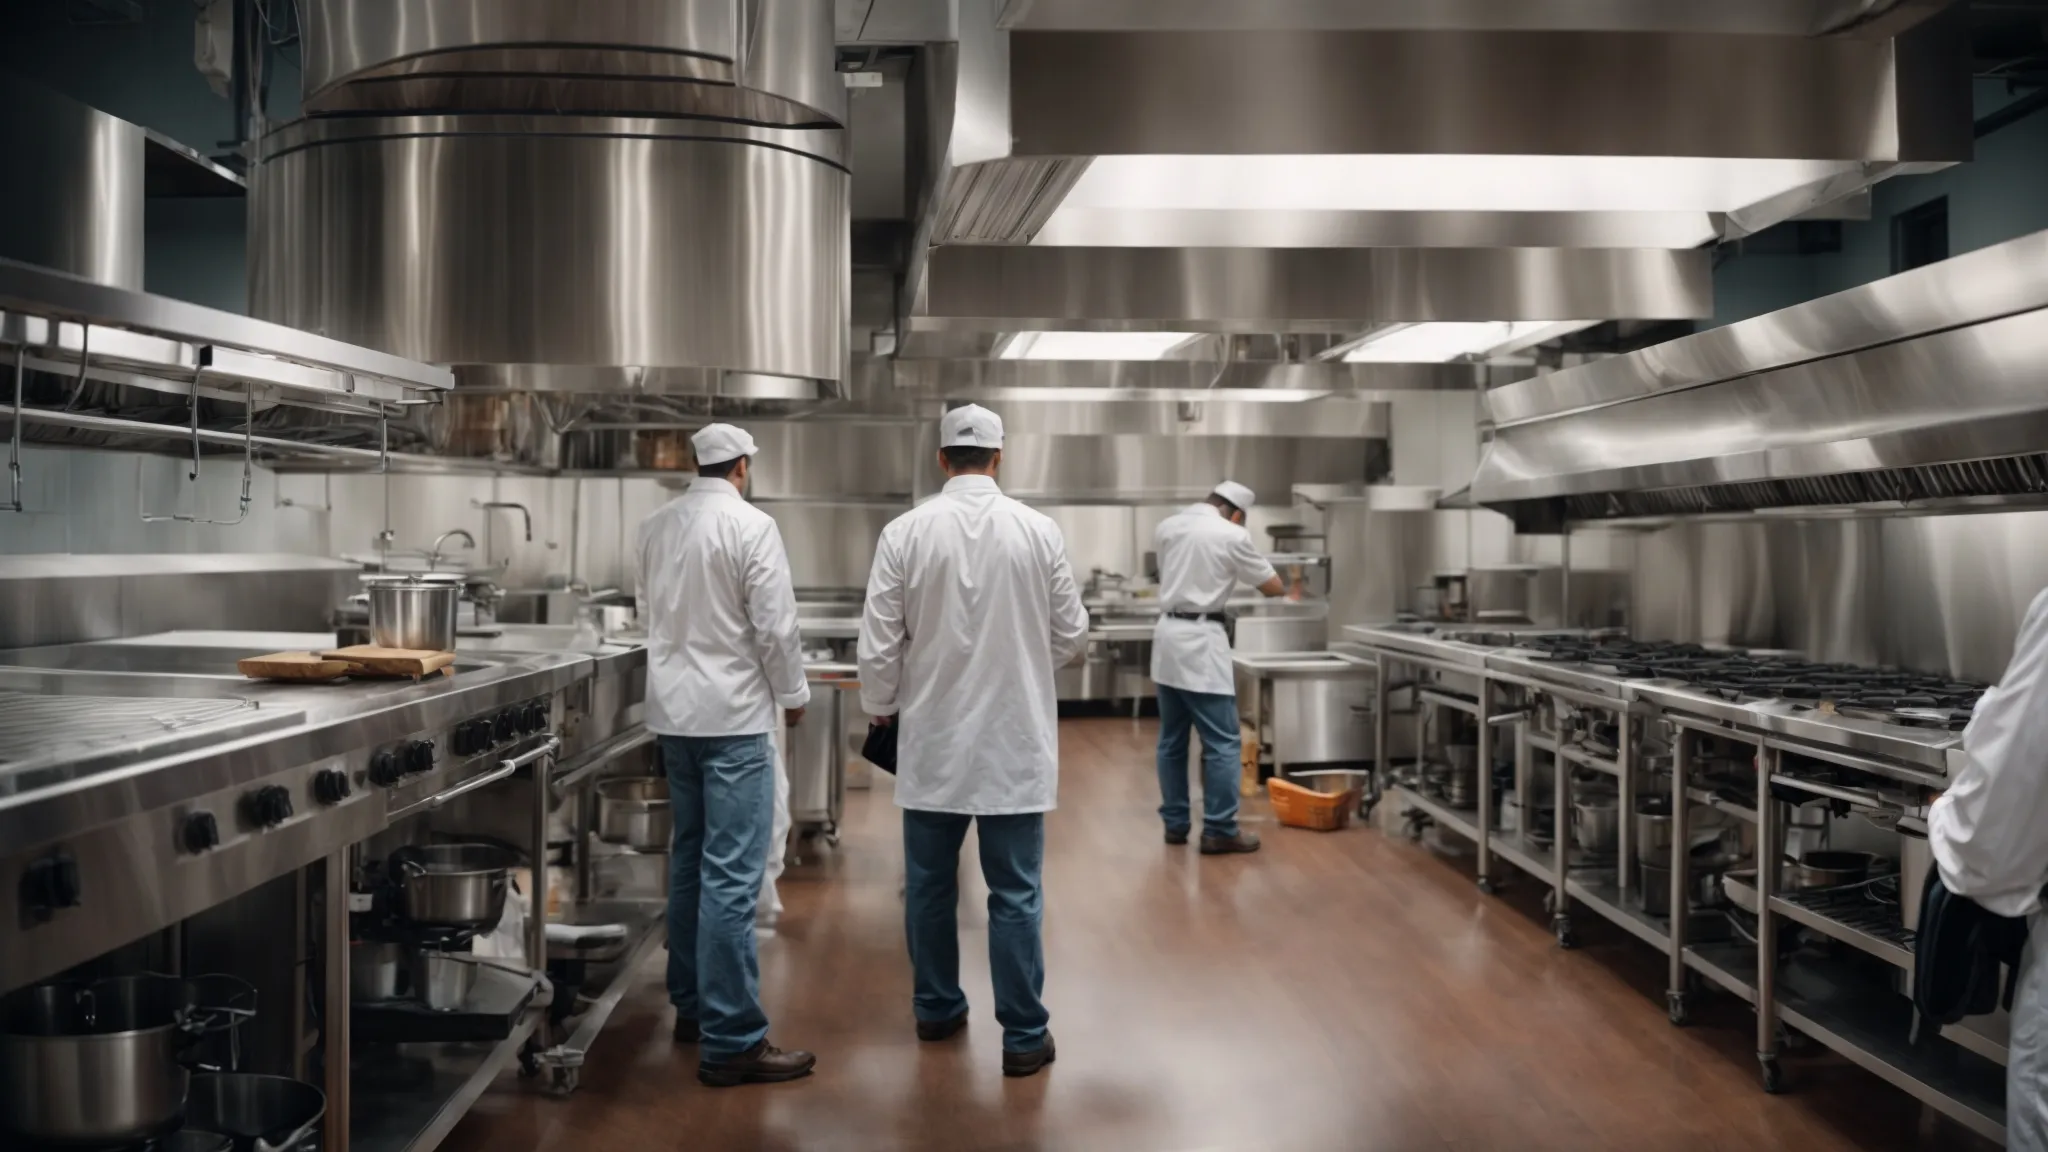 a professional team inspects a large commercial kitchen, evaluating the cleanliness of an exhaust system above stainless steel appliances.